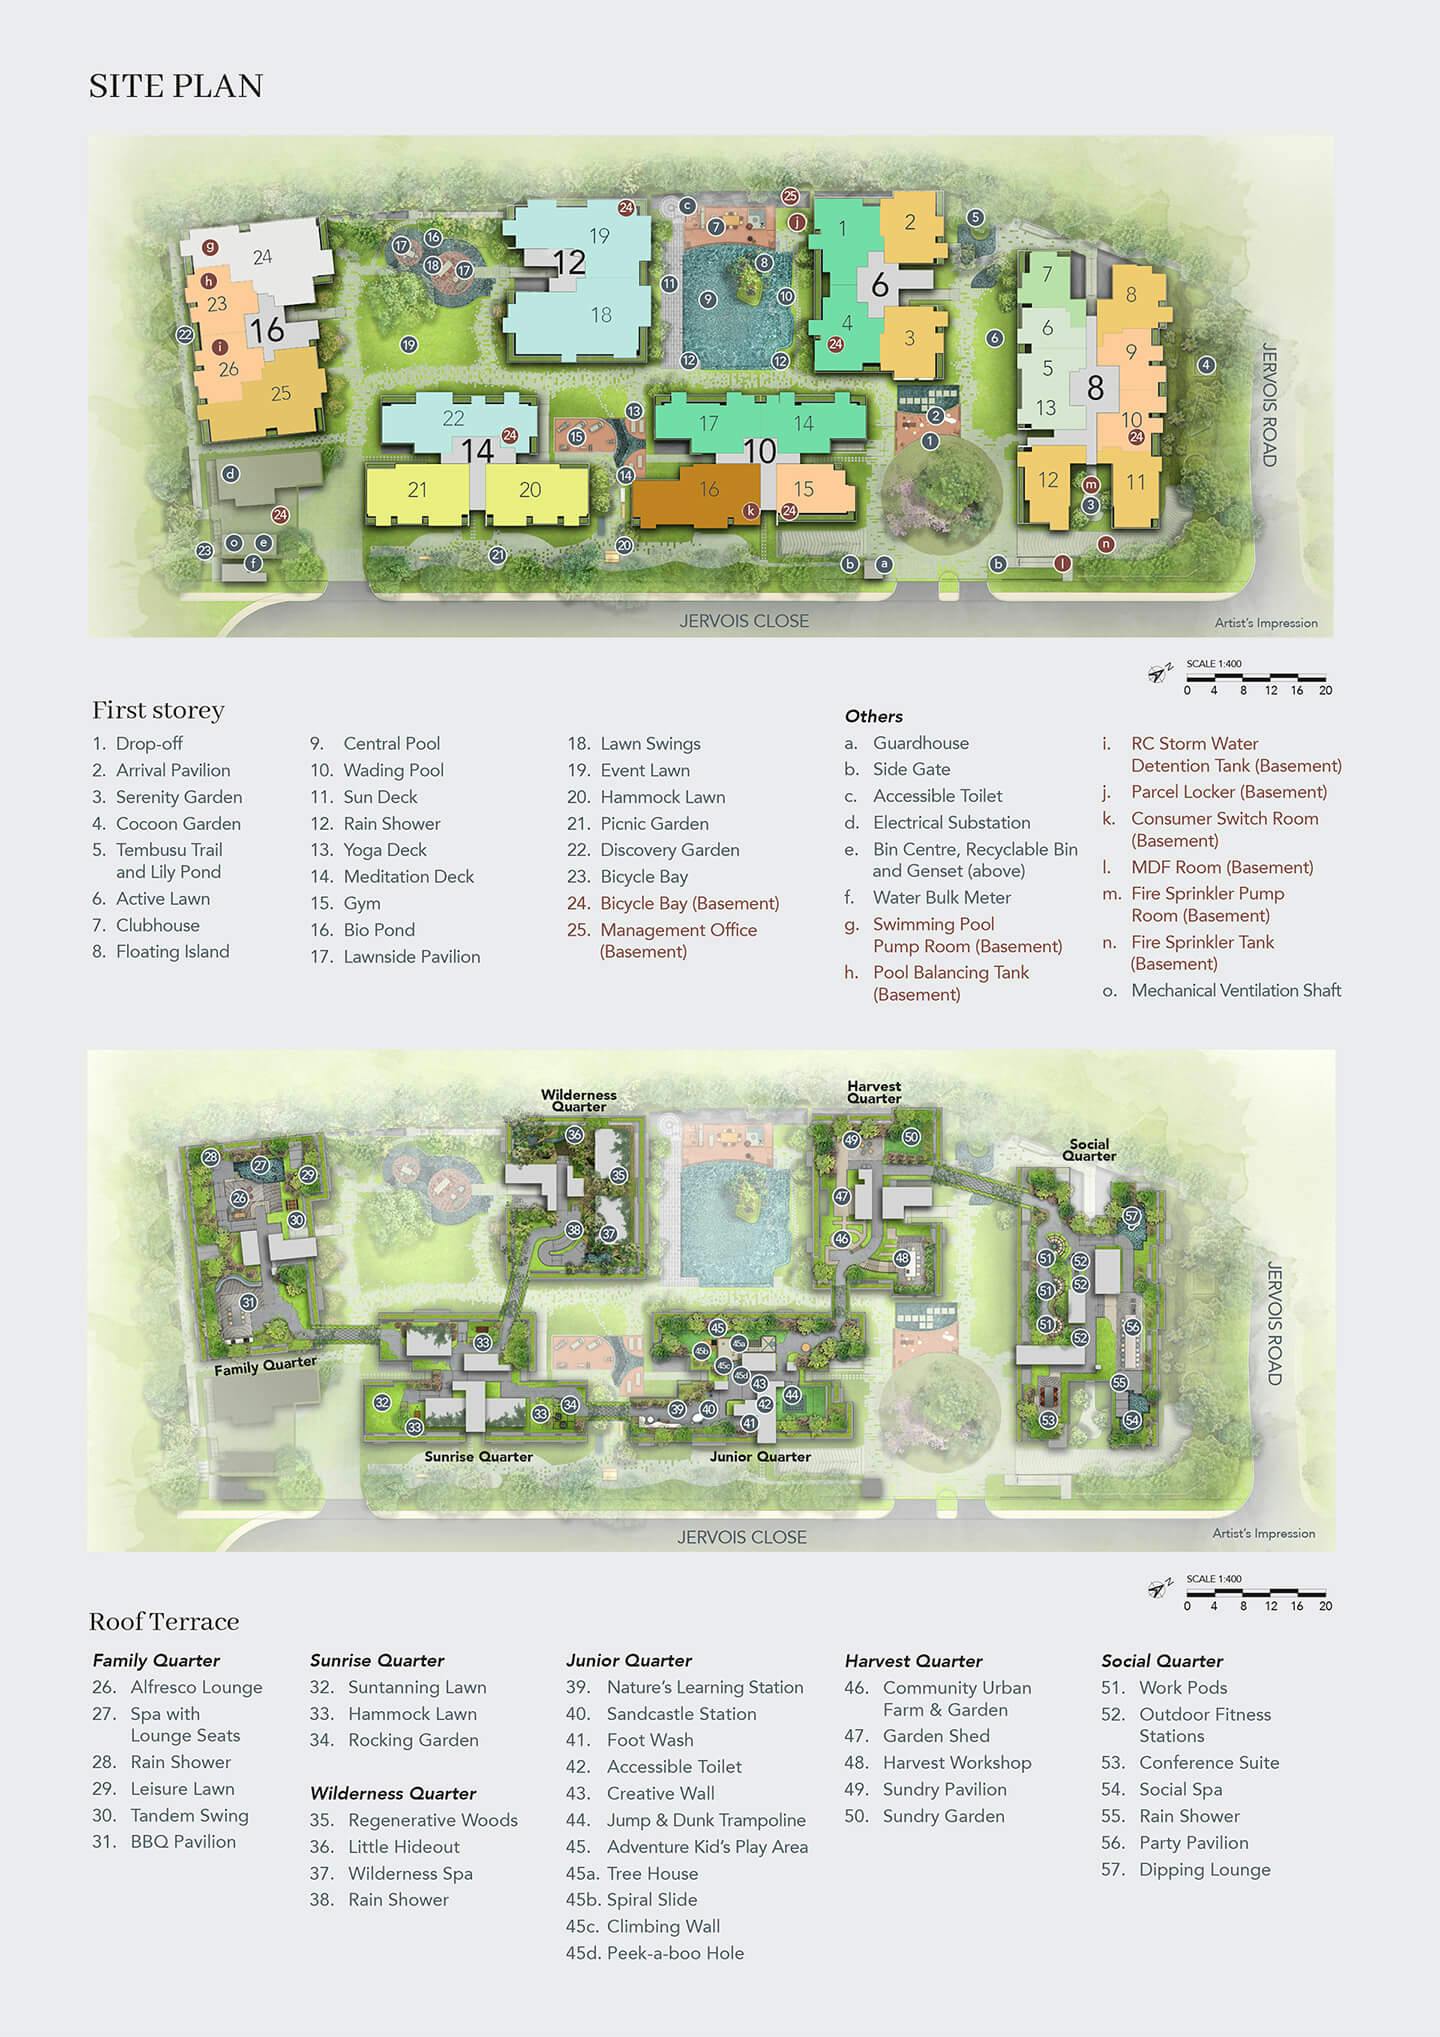 Jervois Mansion's site plan, featuring 6 quarters and a holistic array of curated facilities.